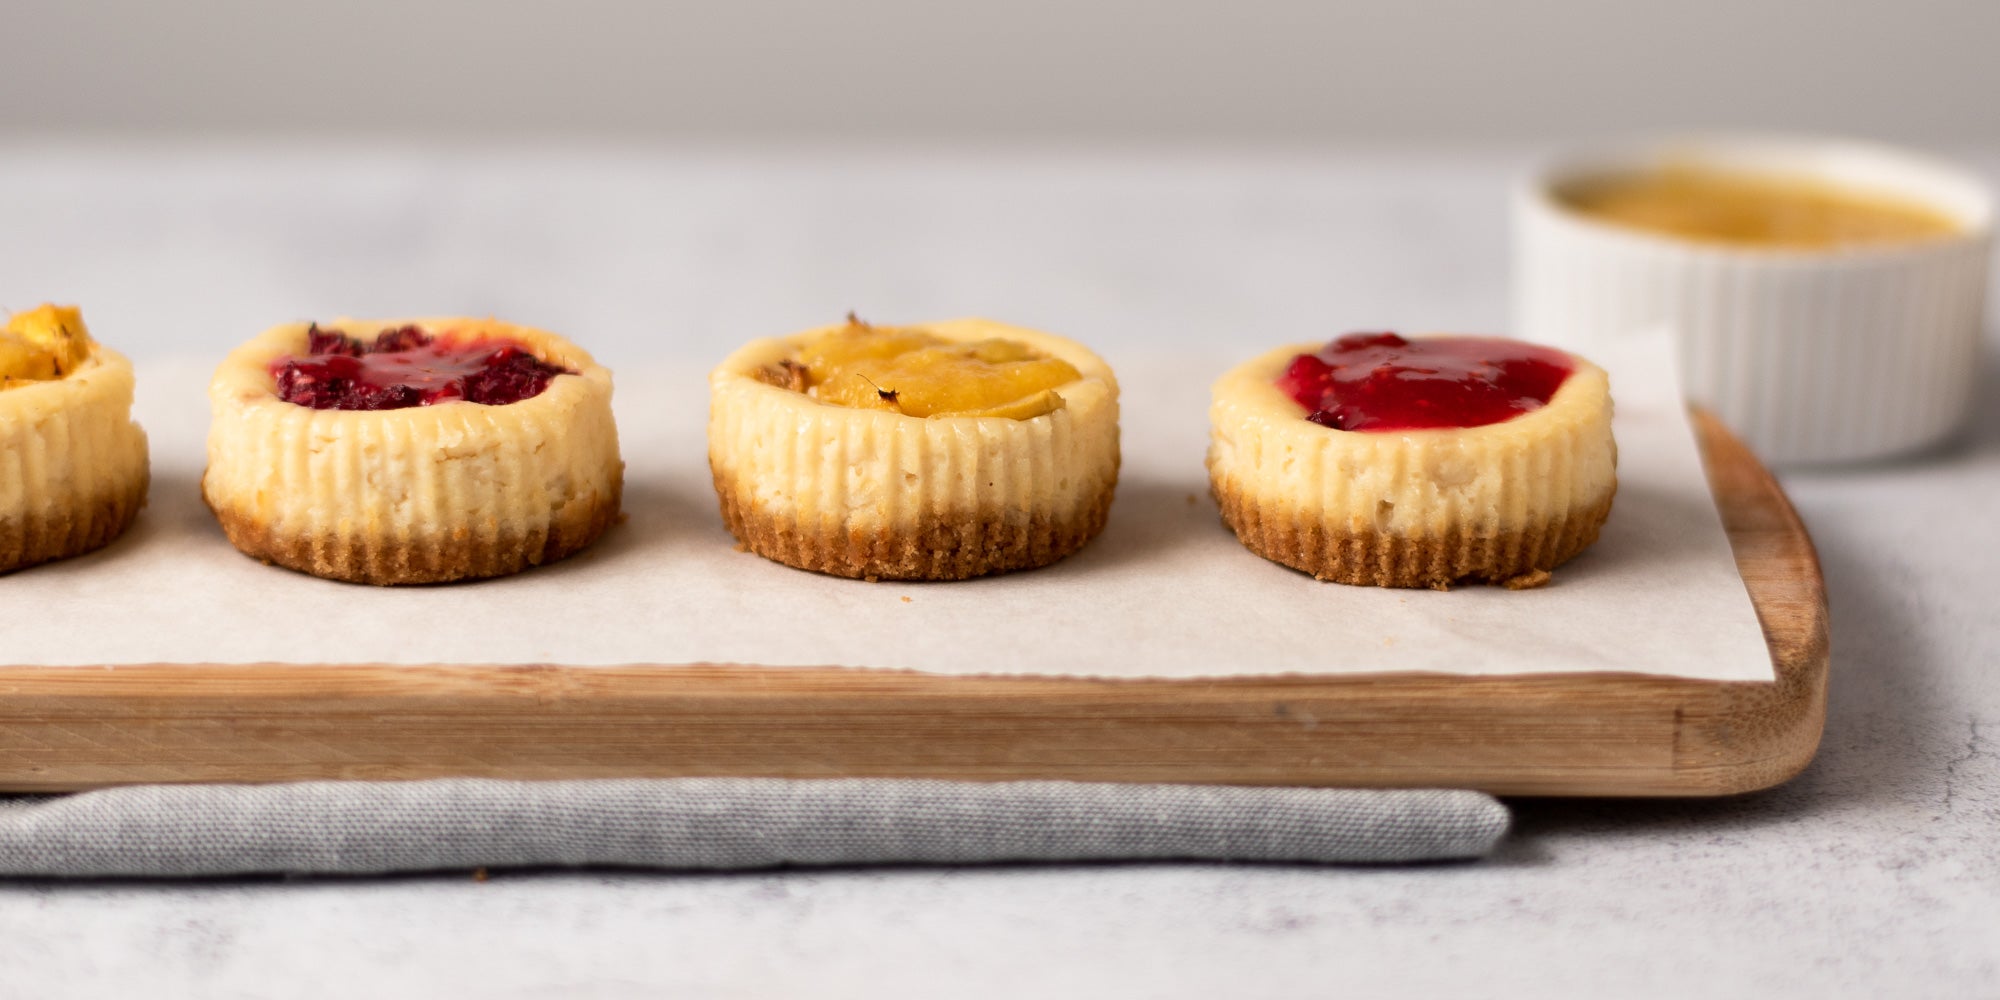 Mini cheesecakes topped with fruit on a wooden board